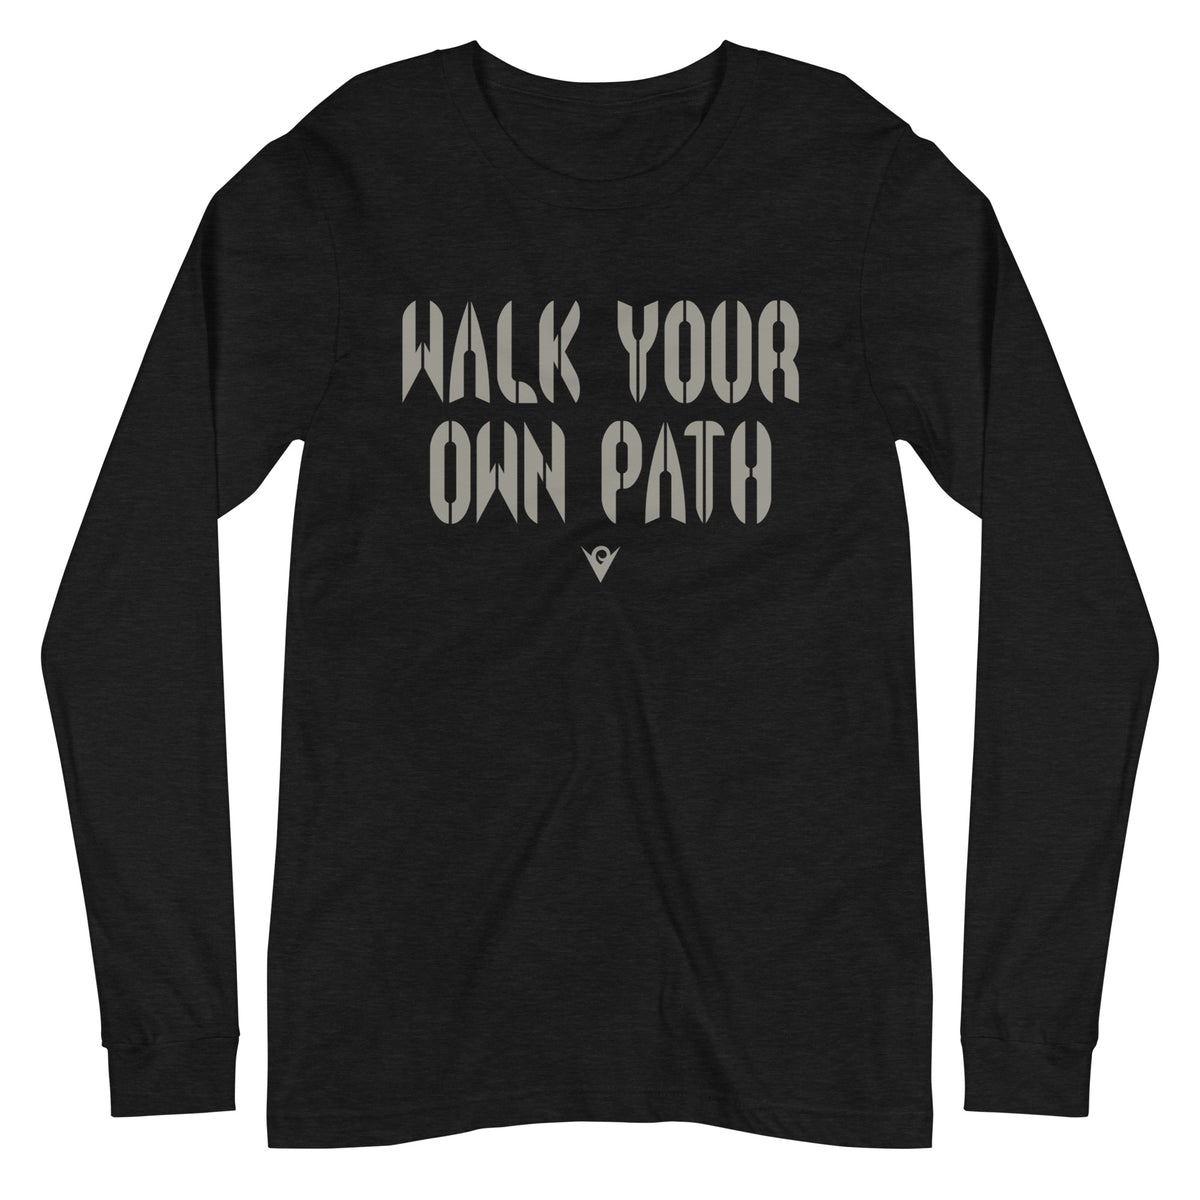 Walk Your Own Path (Unisex Long-Sleeve T-shirt) Excelsior